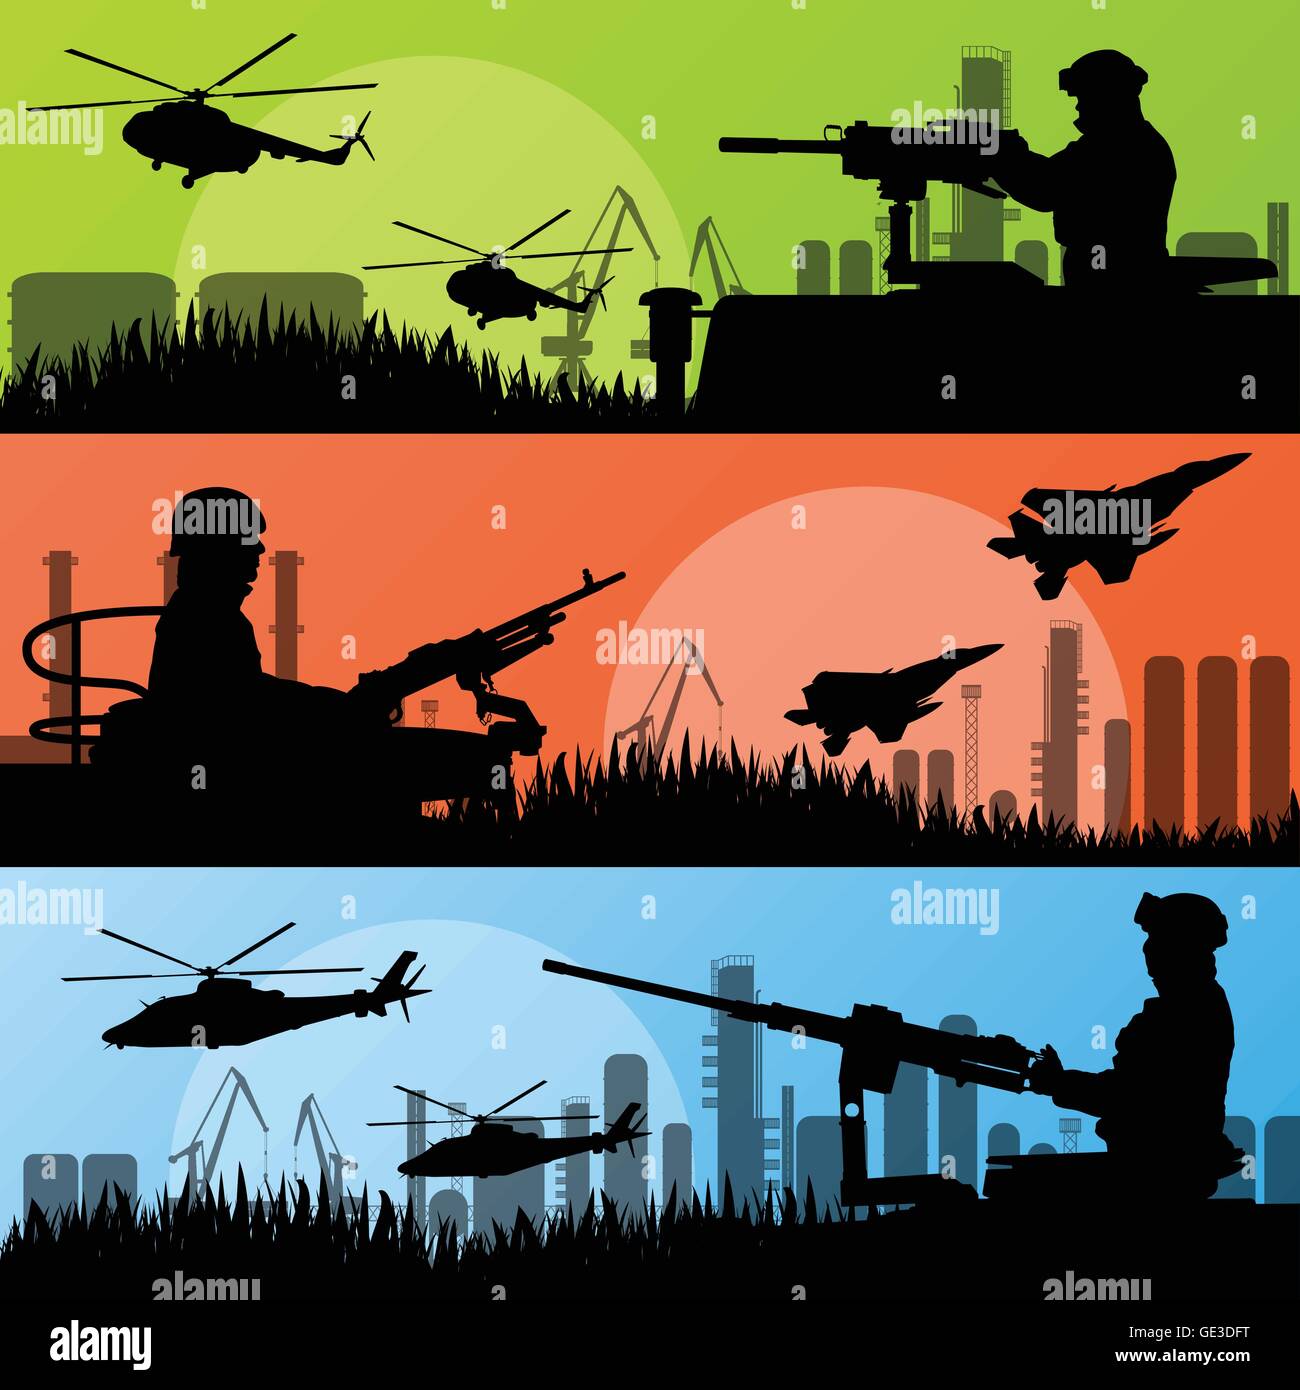 Army soldiers, planes, helicopters, guns and transportation in urban industrial factory landscape background illustration vector Stock Vector